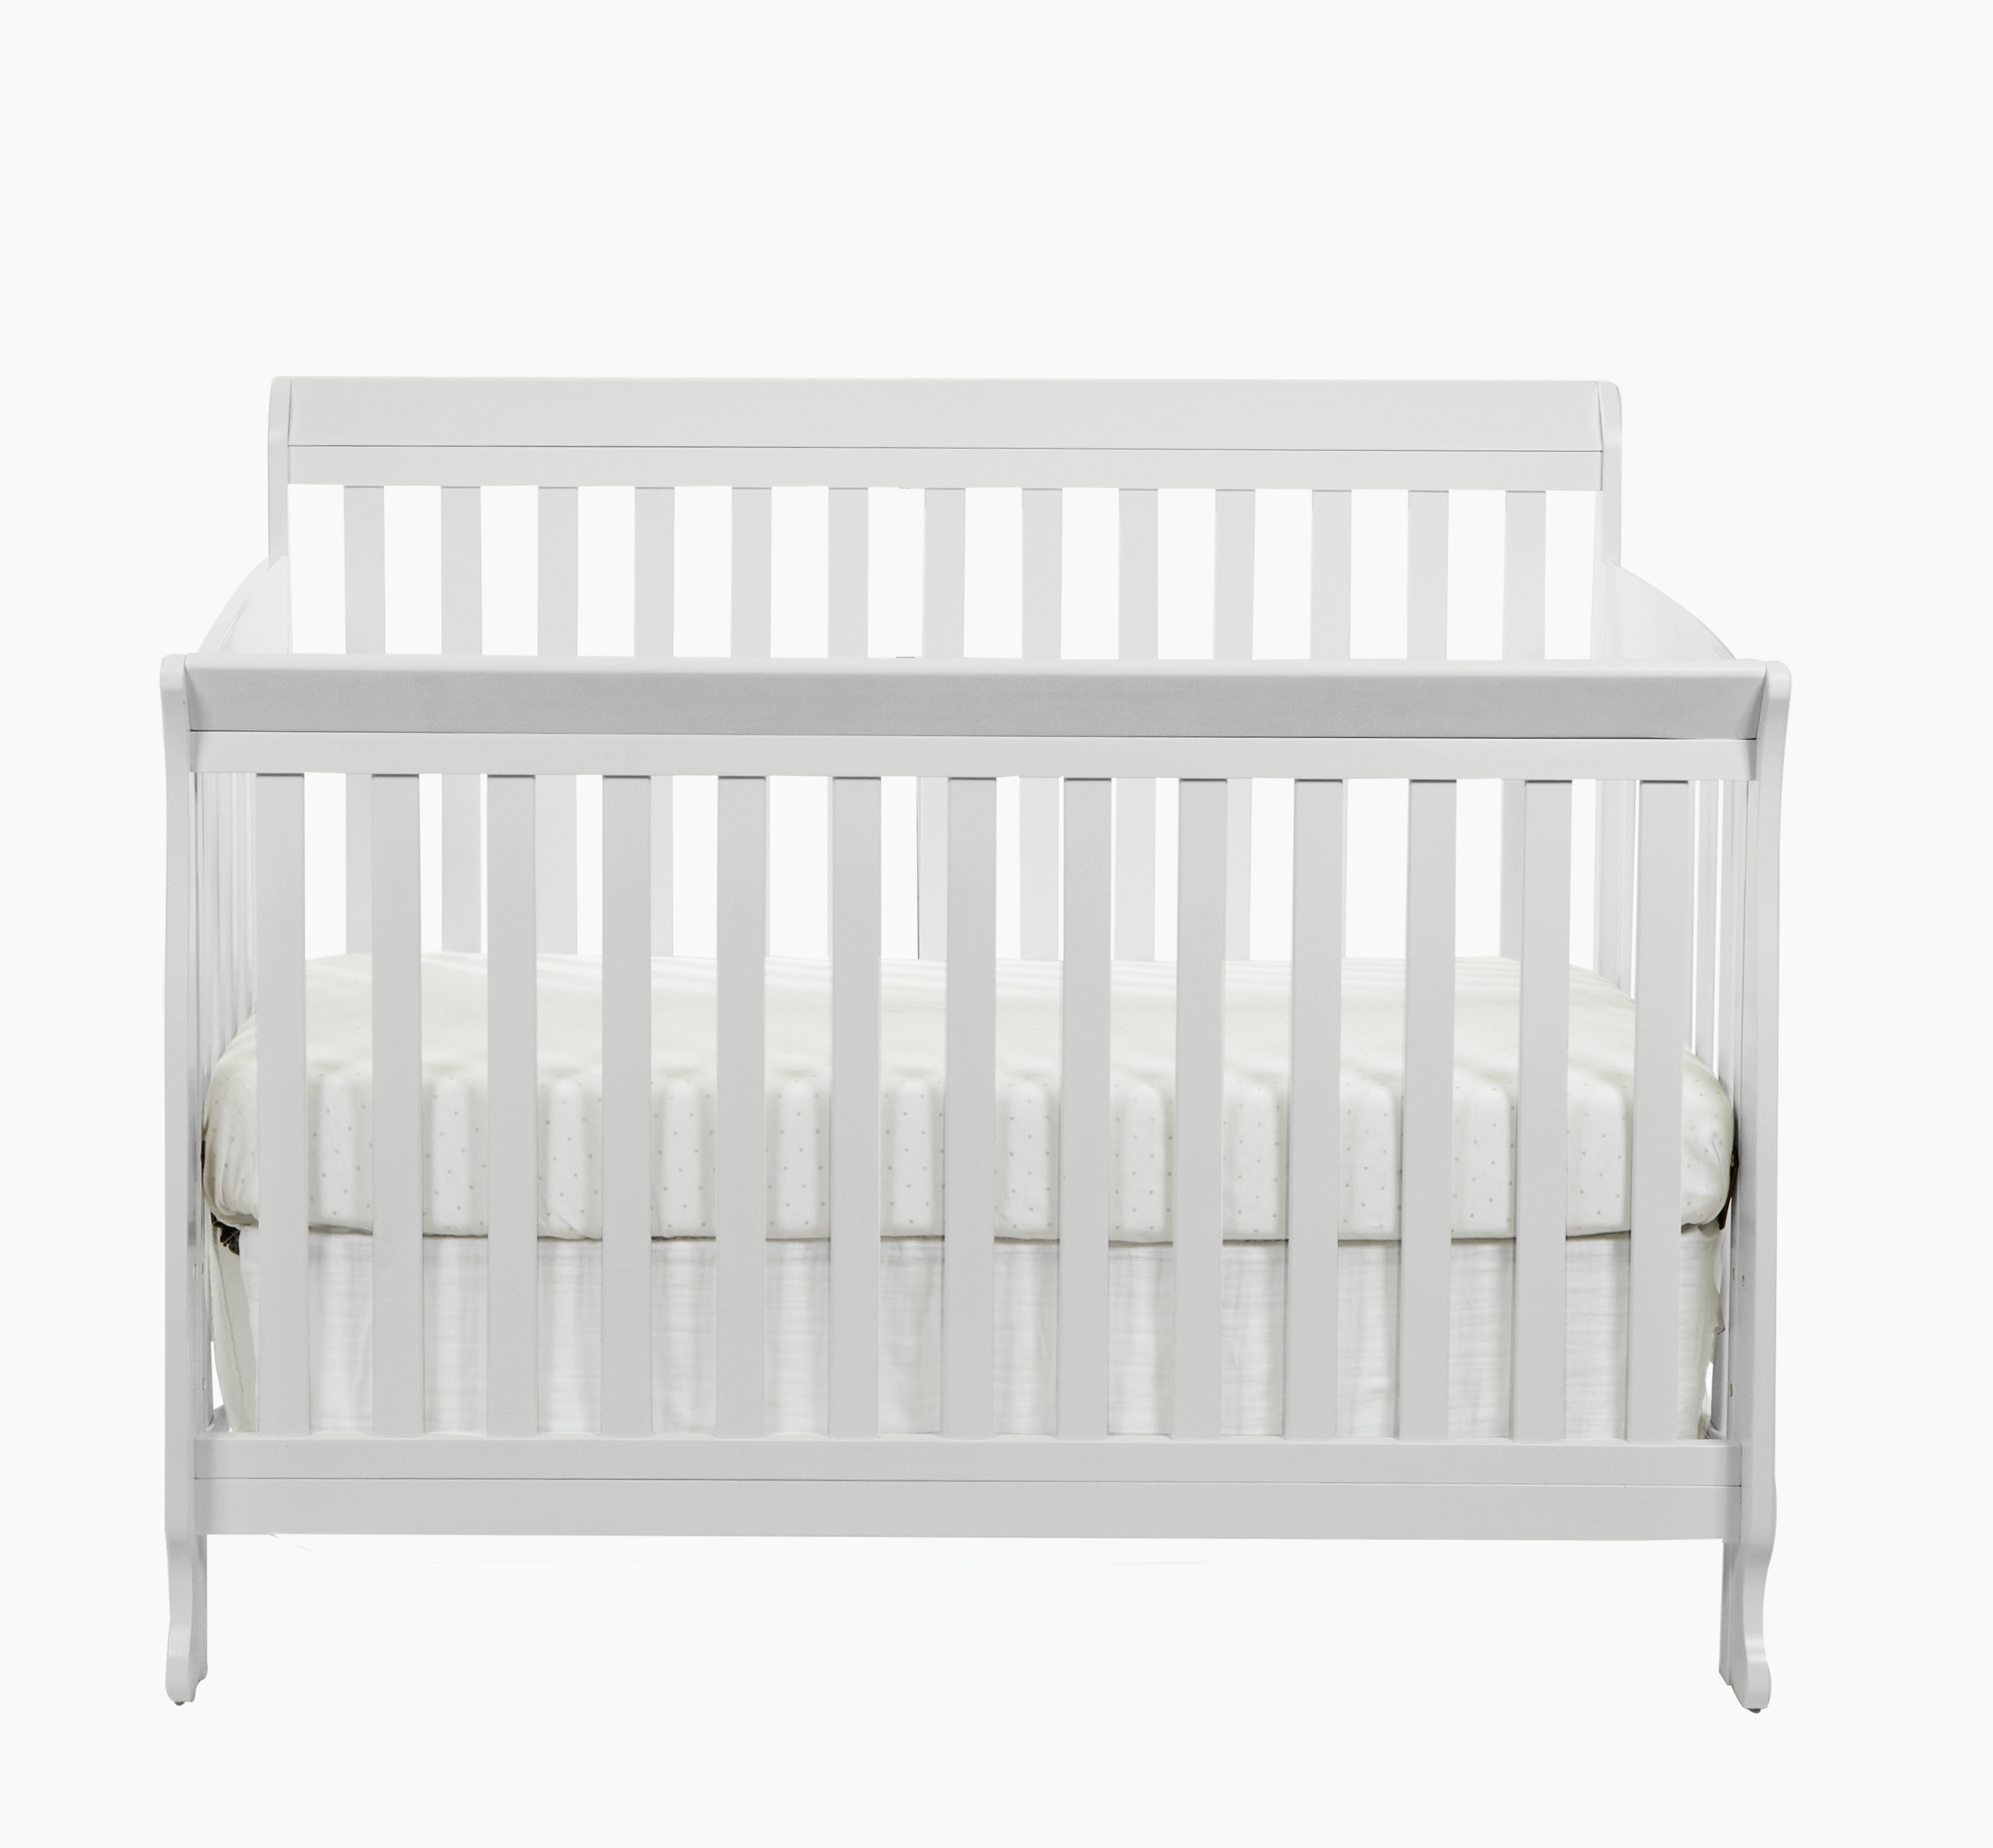 Suite Bebe Riley Crib and Toddler Guard Rail Bundle, White - image 4 of 9